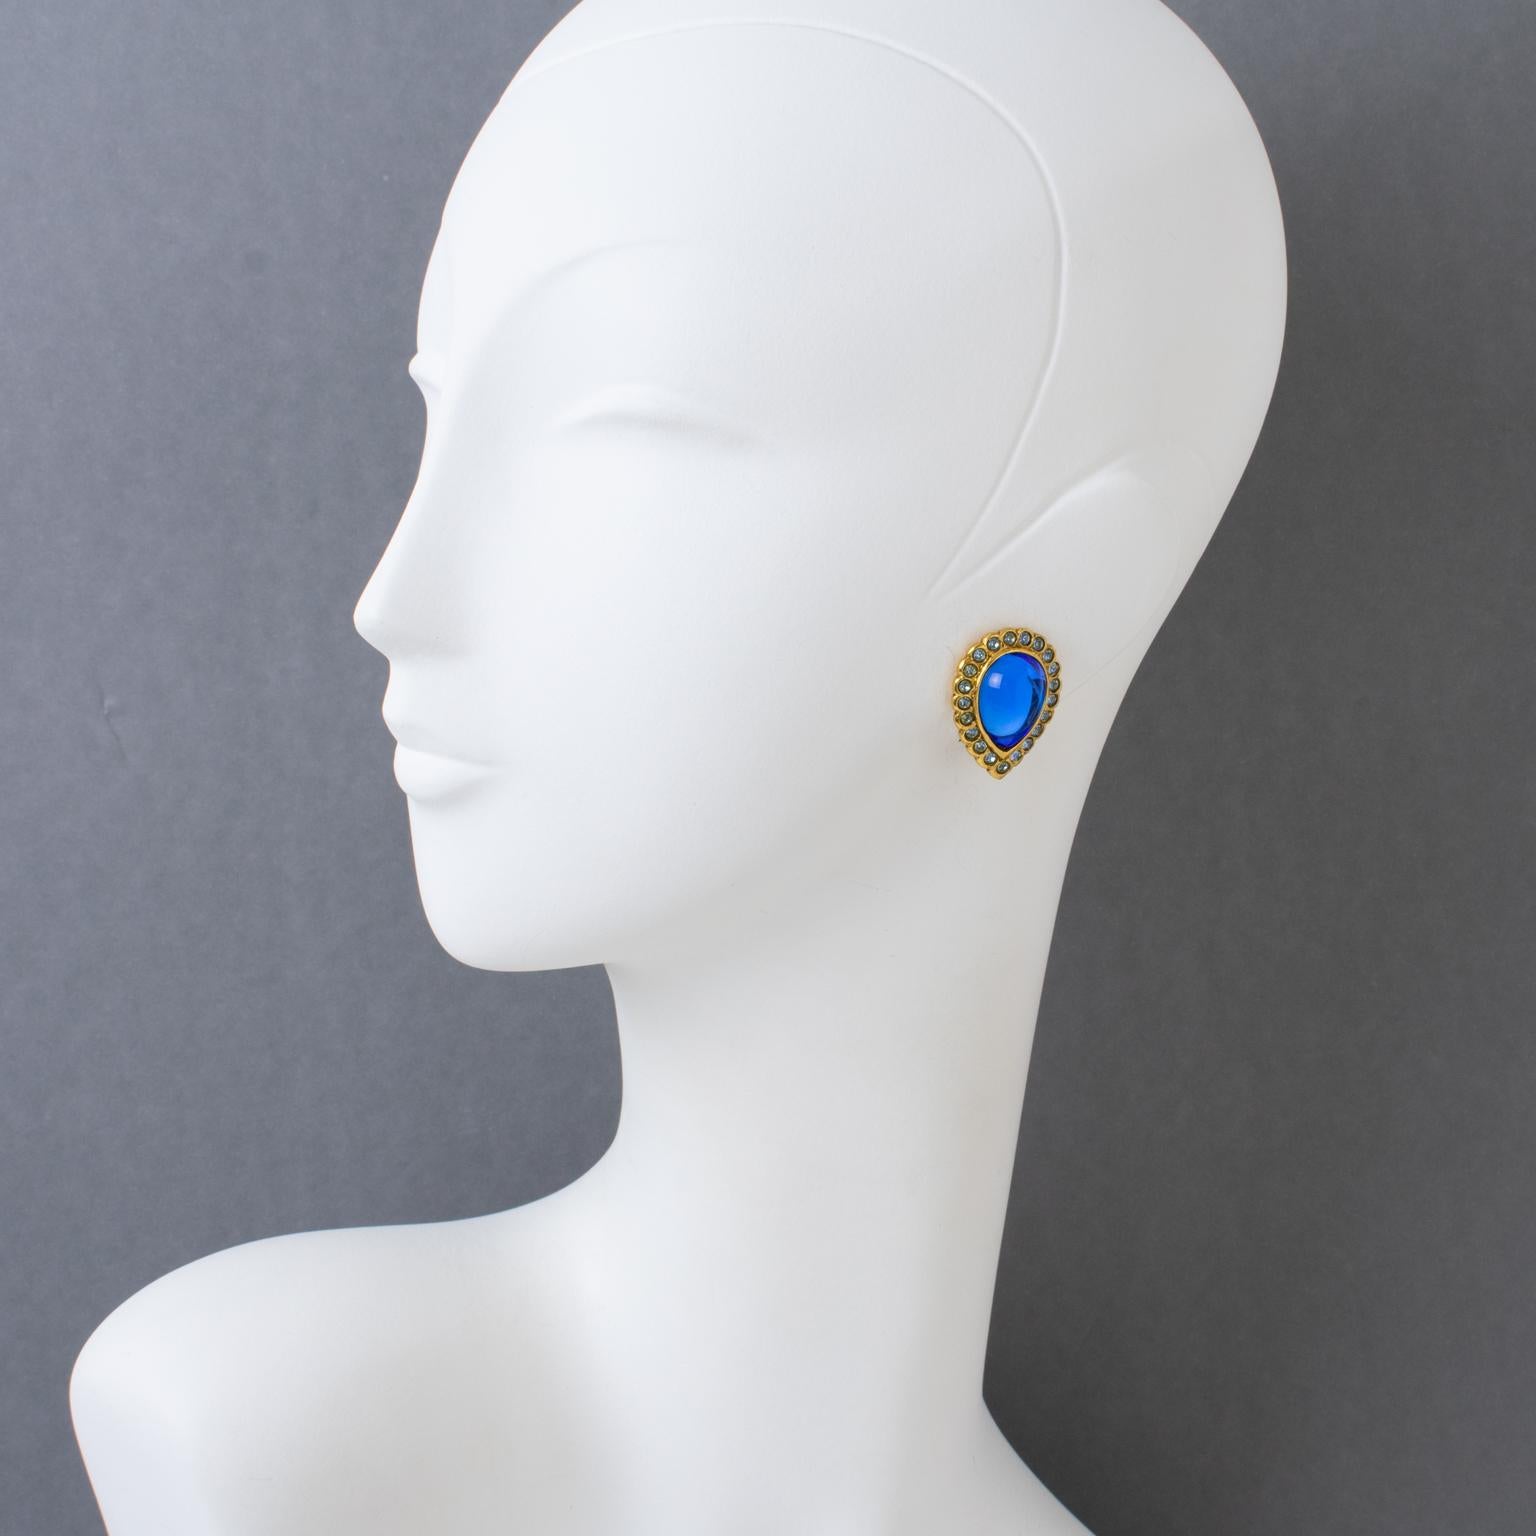 These exquisite French designer Jean Louis Scherrer Paris clip-on earrings feature a geometric teardrop dimensional shape, with a gilded metal framing embellished with cobalt blue Gripoix poured glass cabochons and topped with baby blue crystal